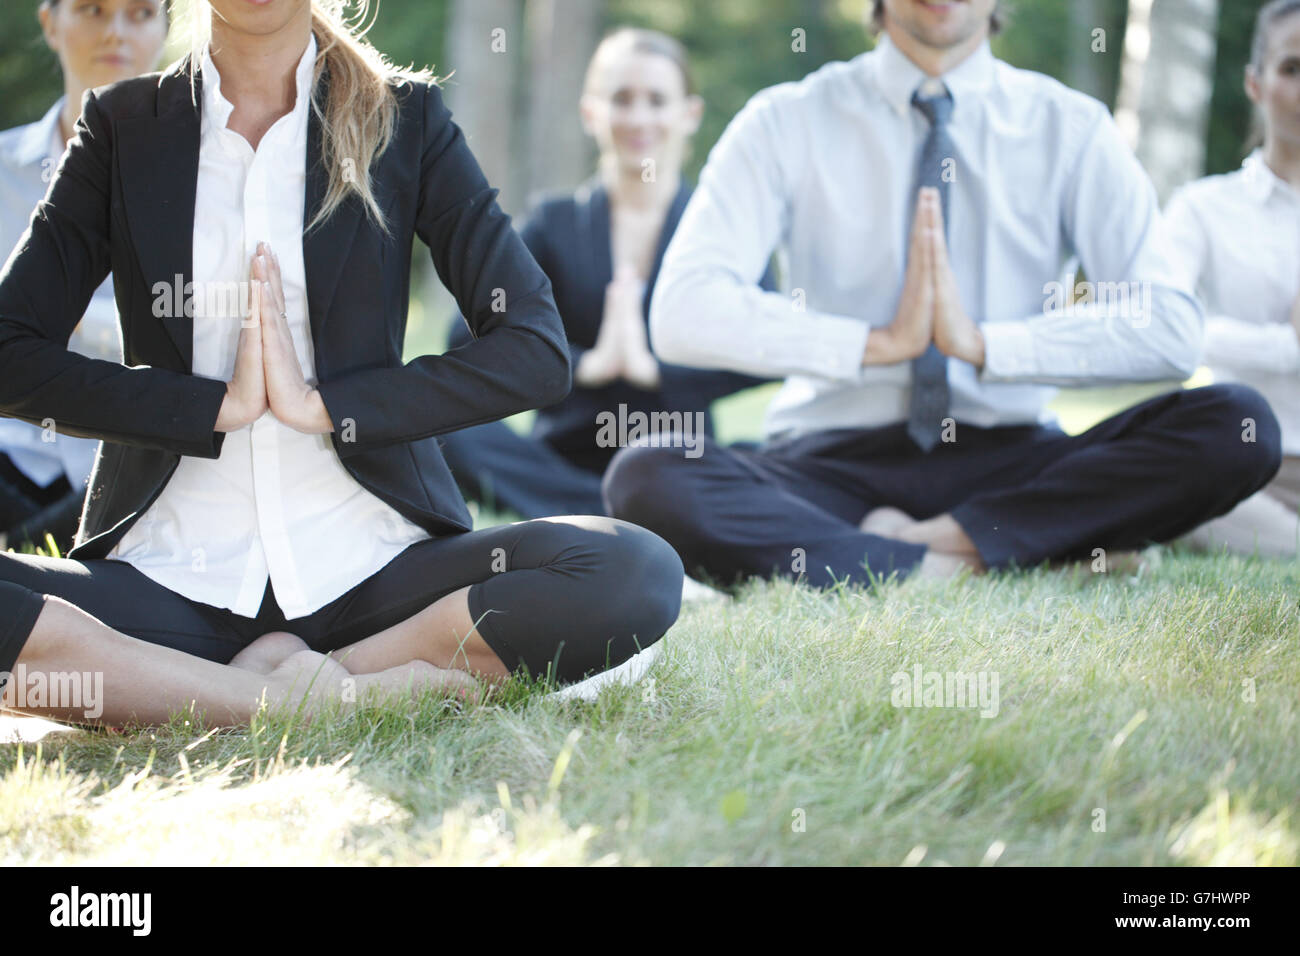 Business people practicing yoga in park Stock Photo